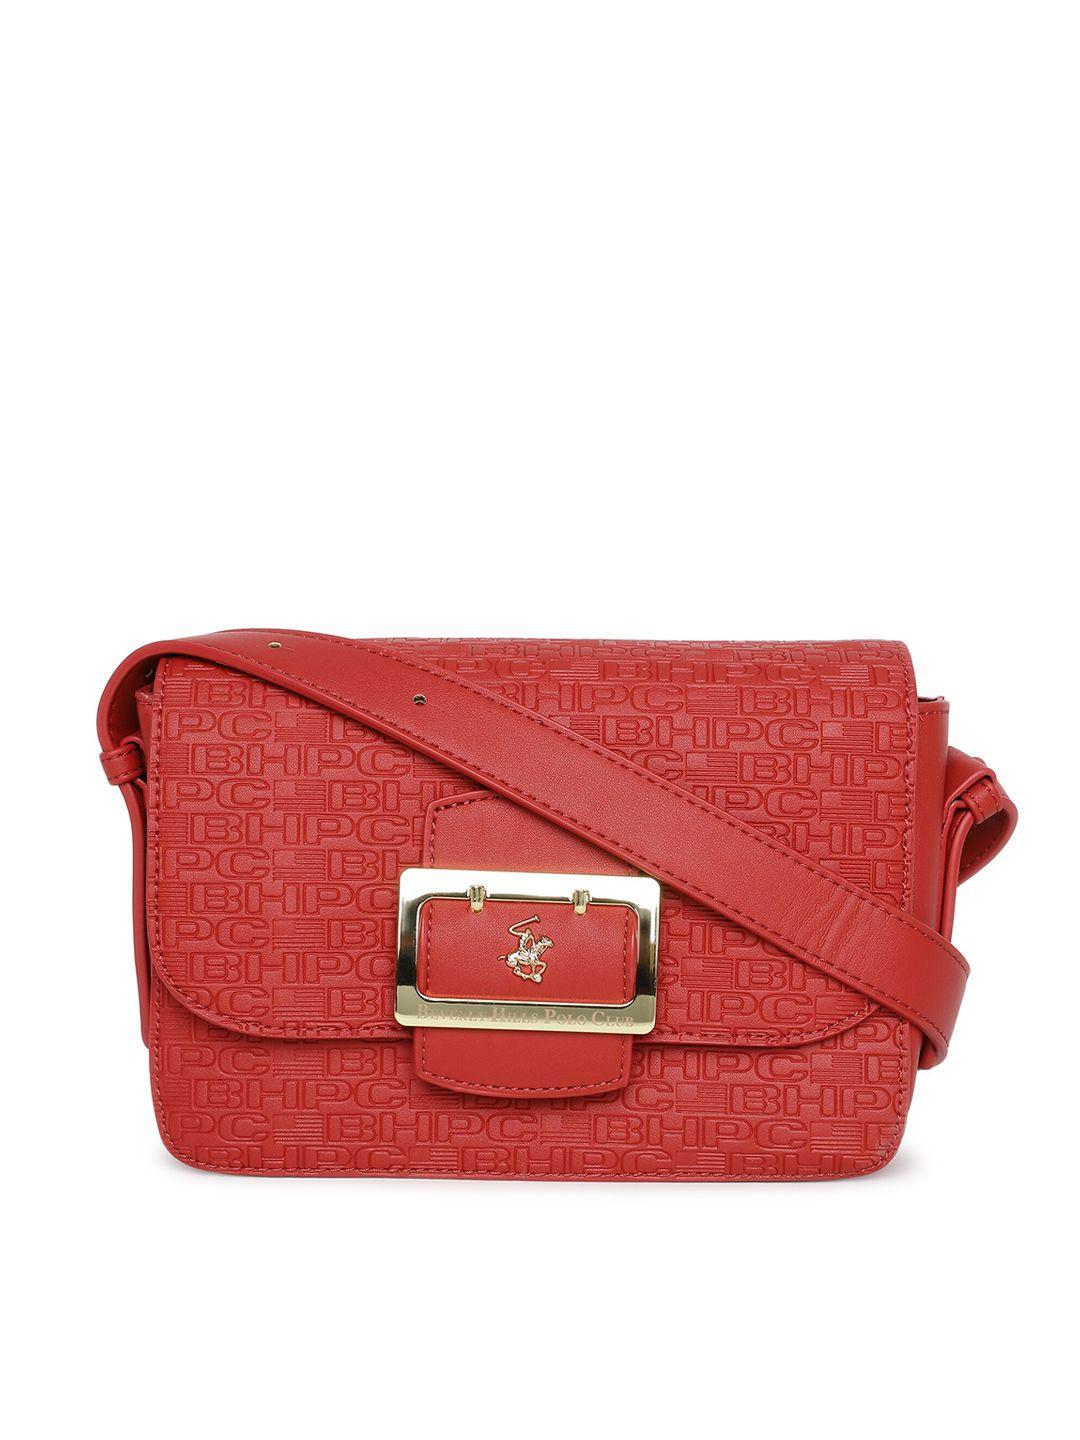 beverly hills polo club textured pu structured sling bag